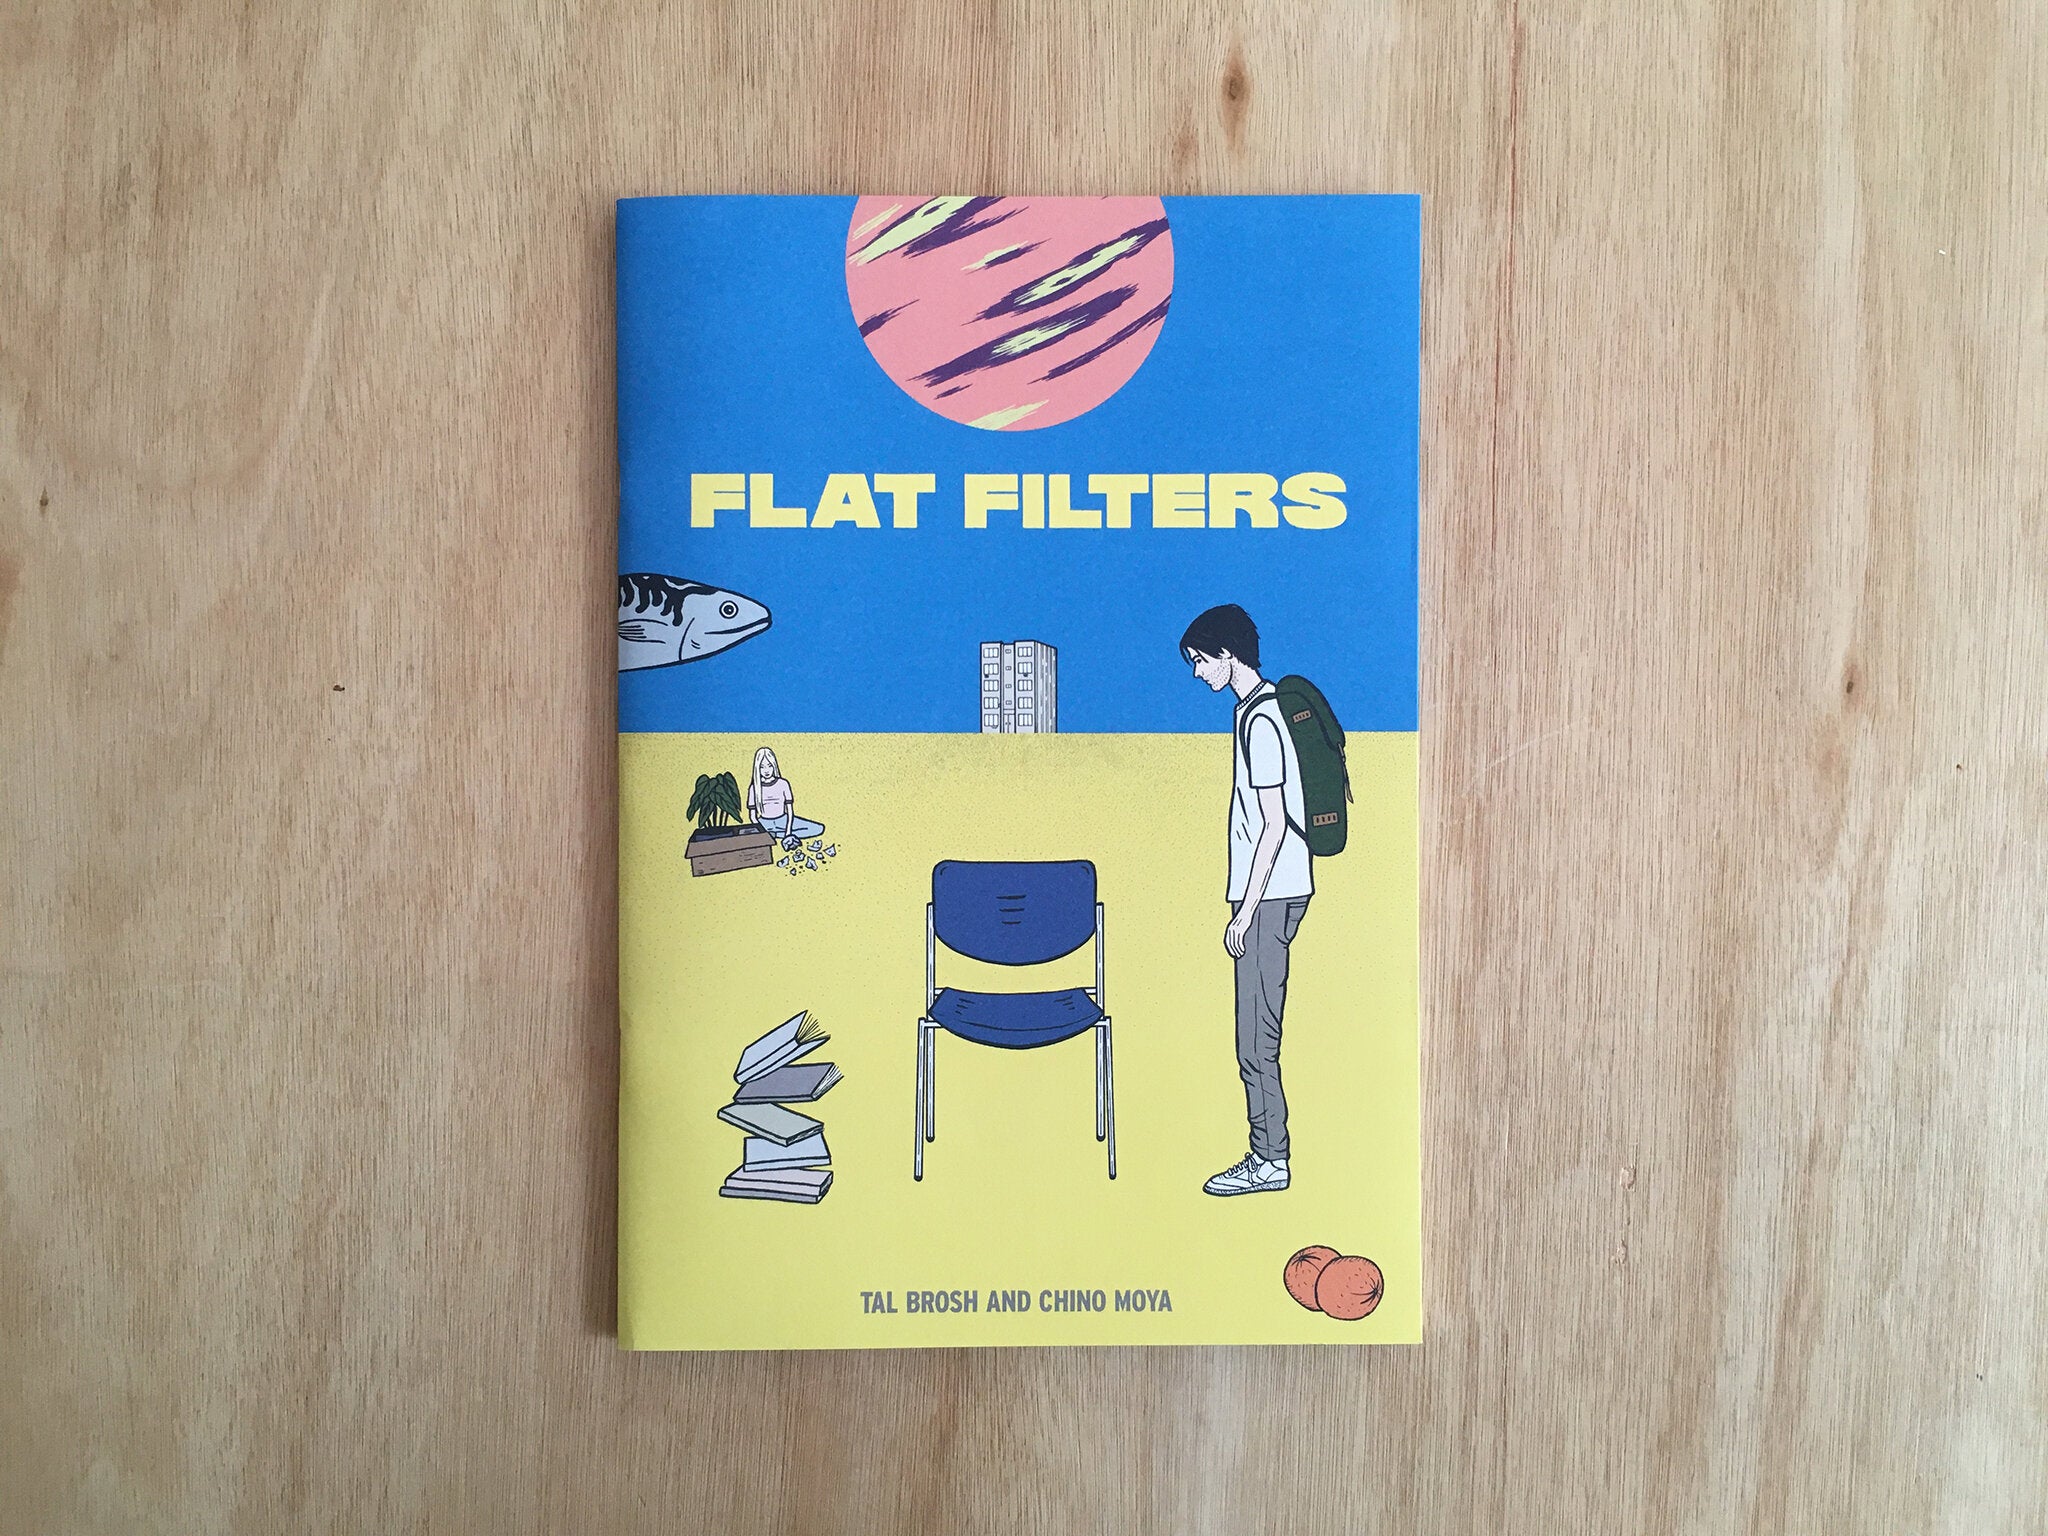 FLAT FILTERS by Tal Brosh and Chino Moya